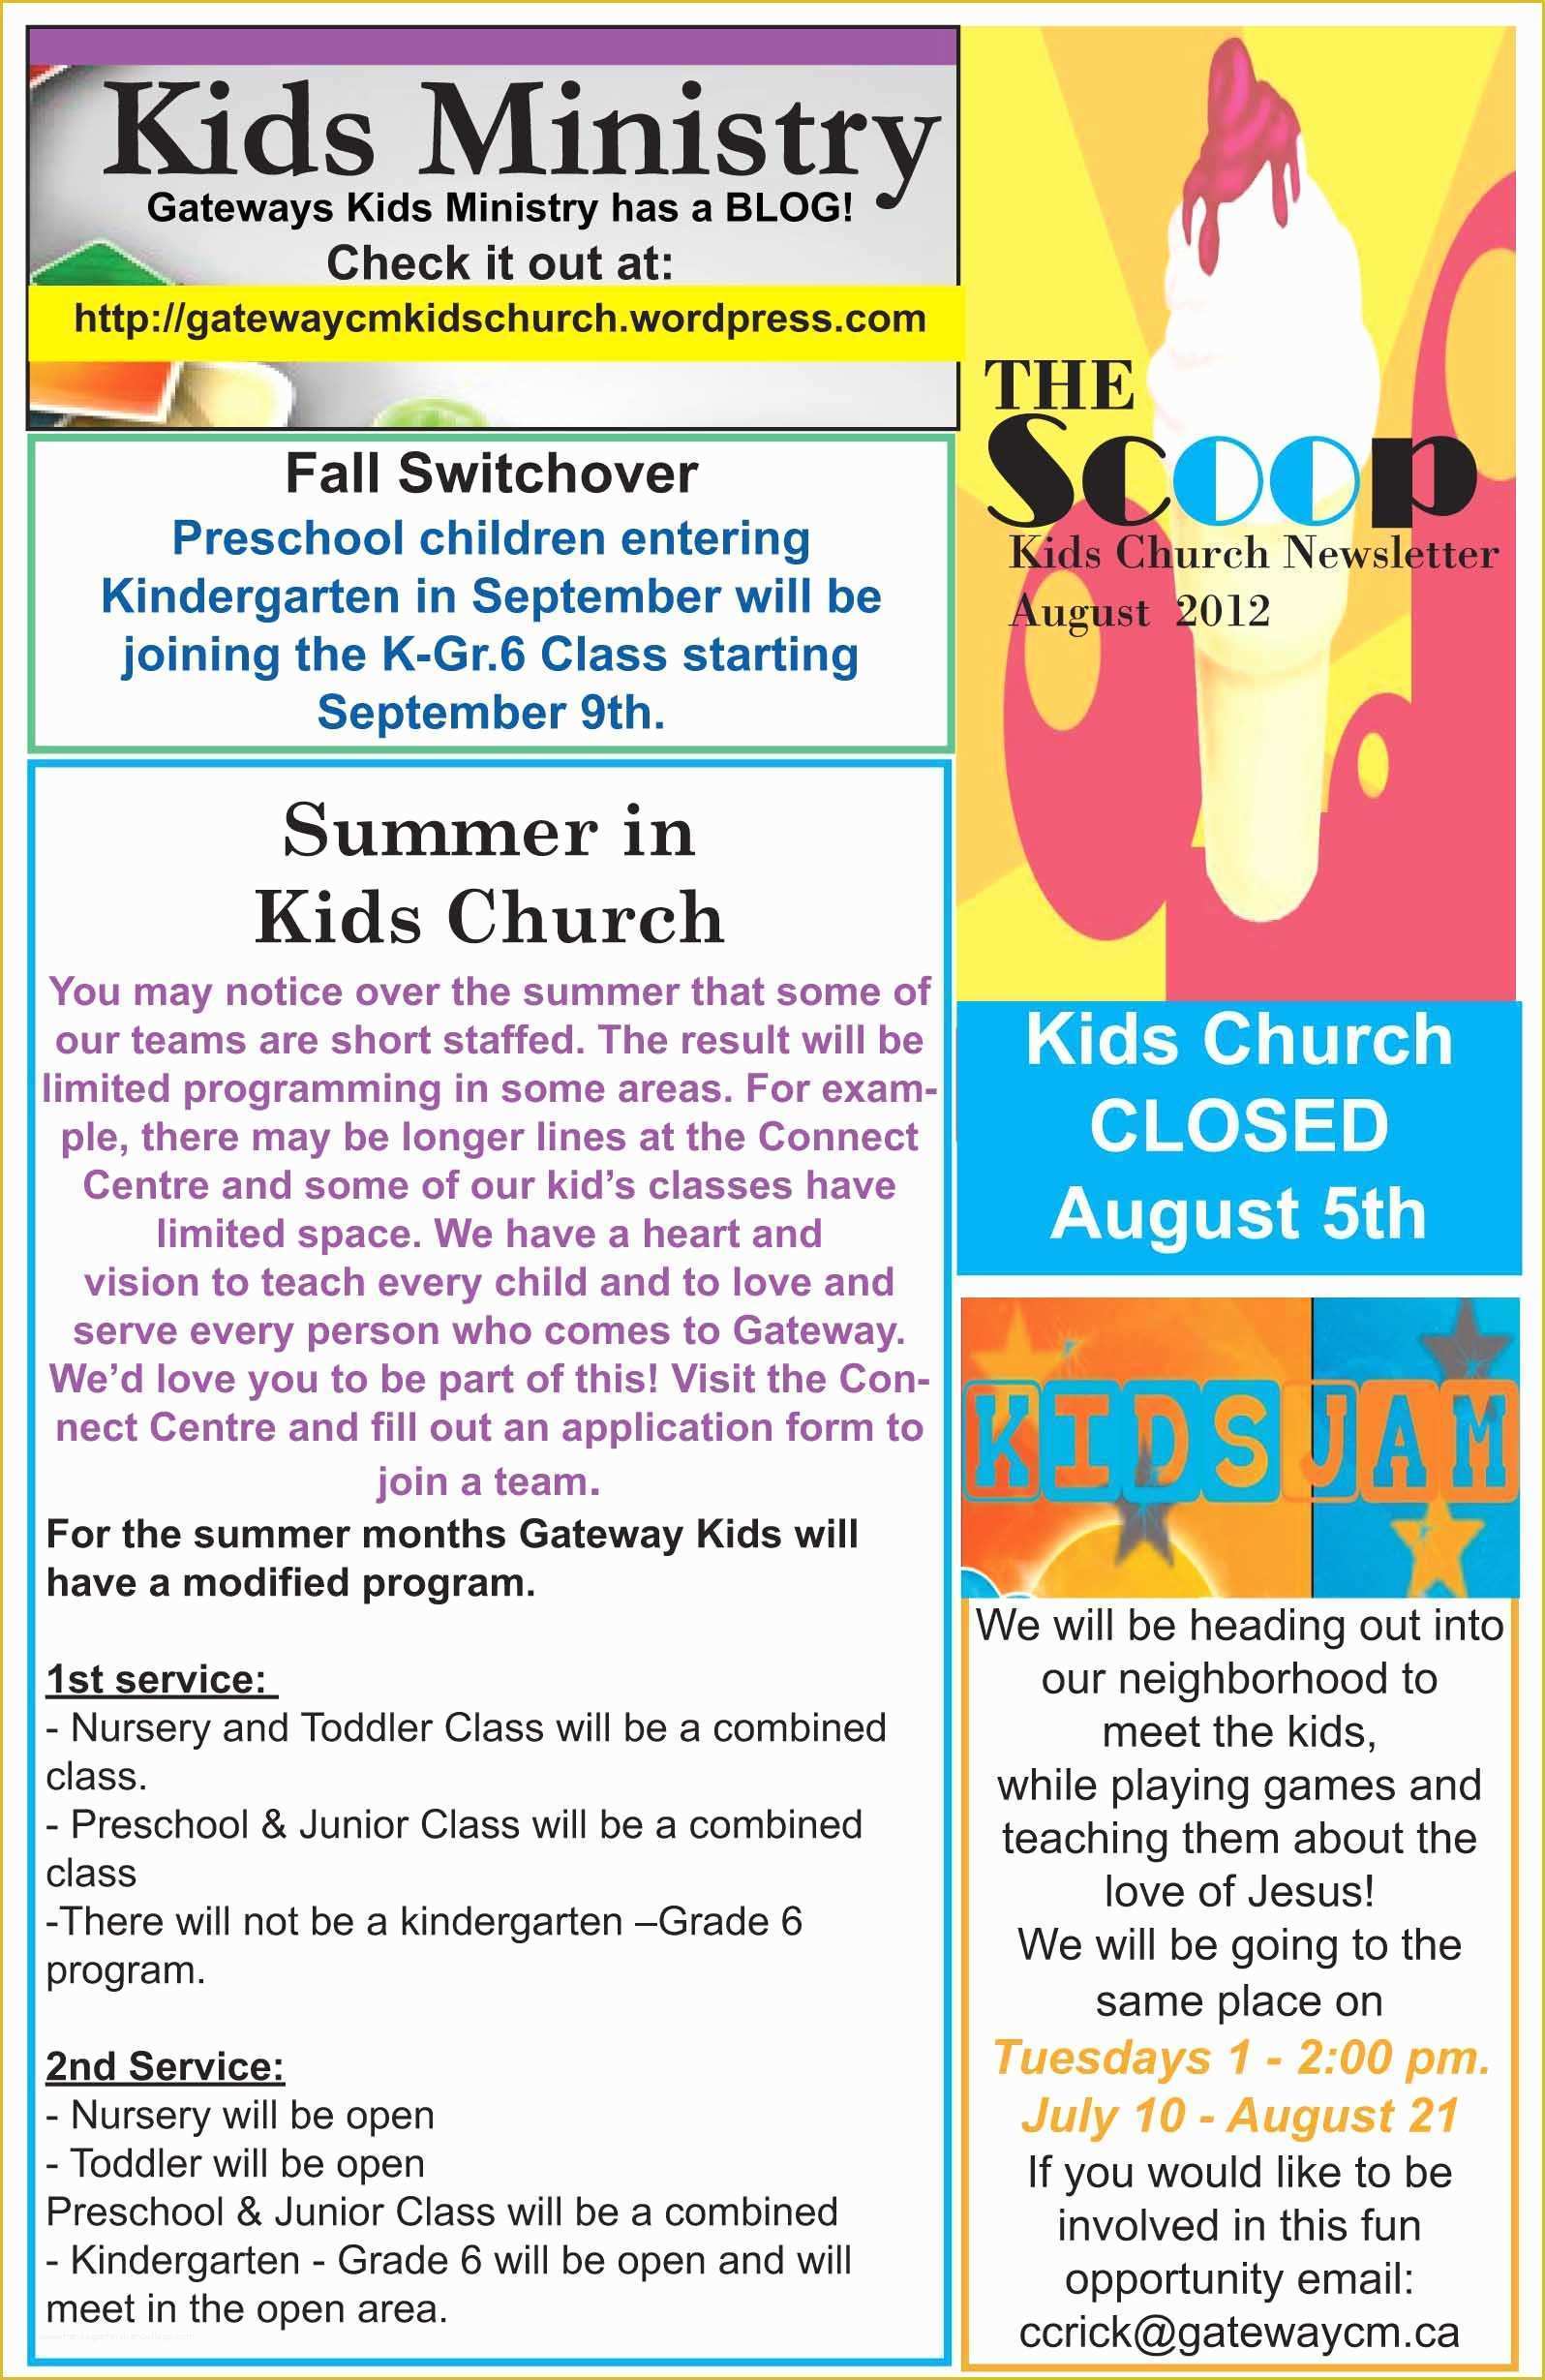 Free Youth Ministry Newsletter Templates Of Kids Church Gateway S Kids Ministry